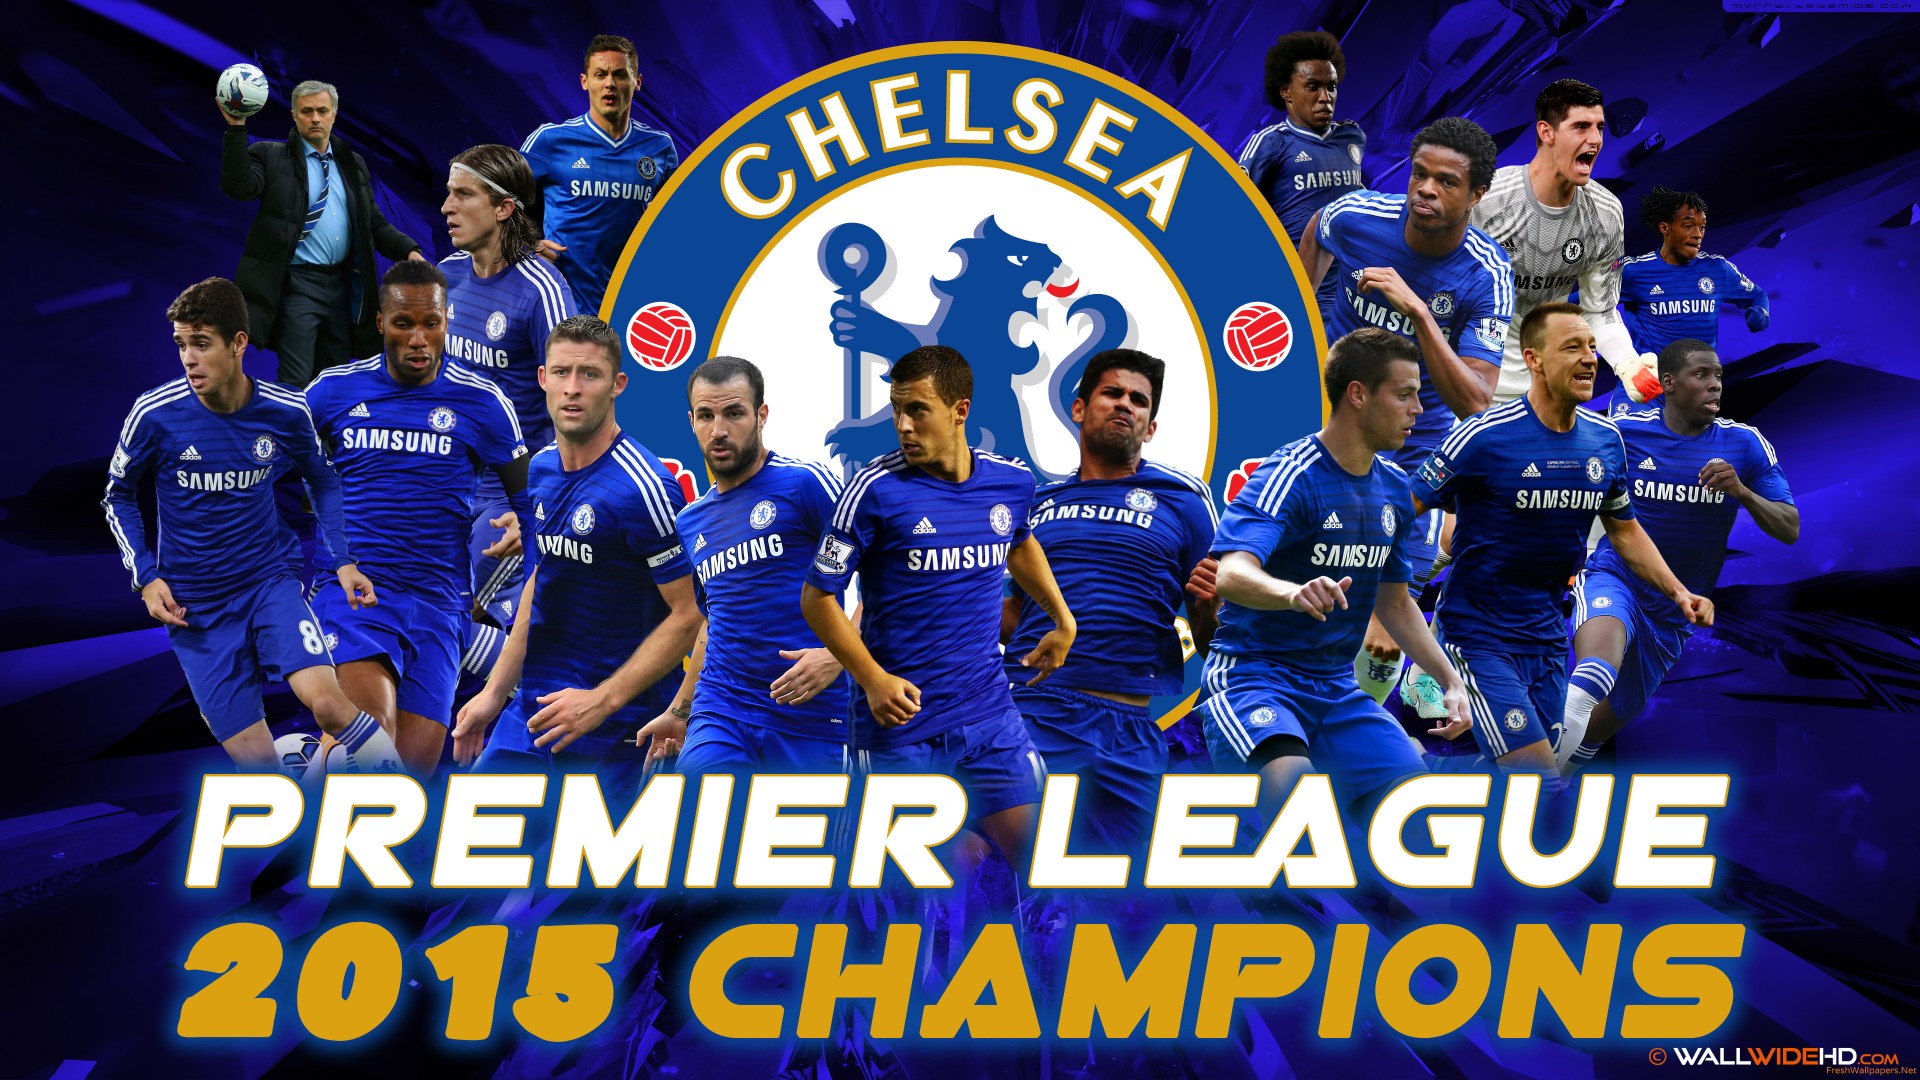 Chelsea Fc Wallpaper Top Collections Of Pictures Image